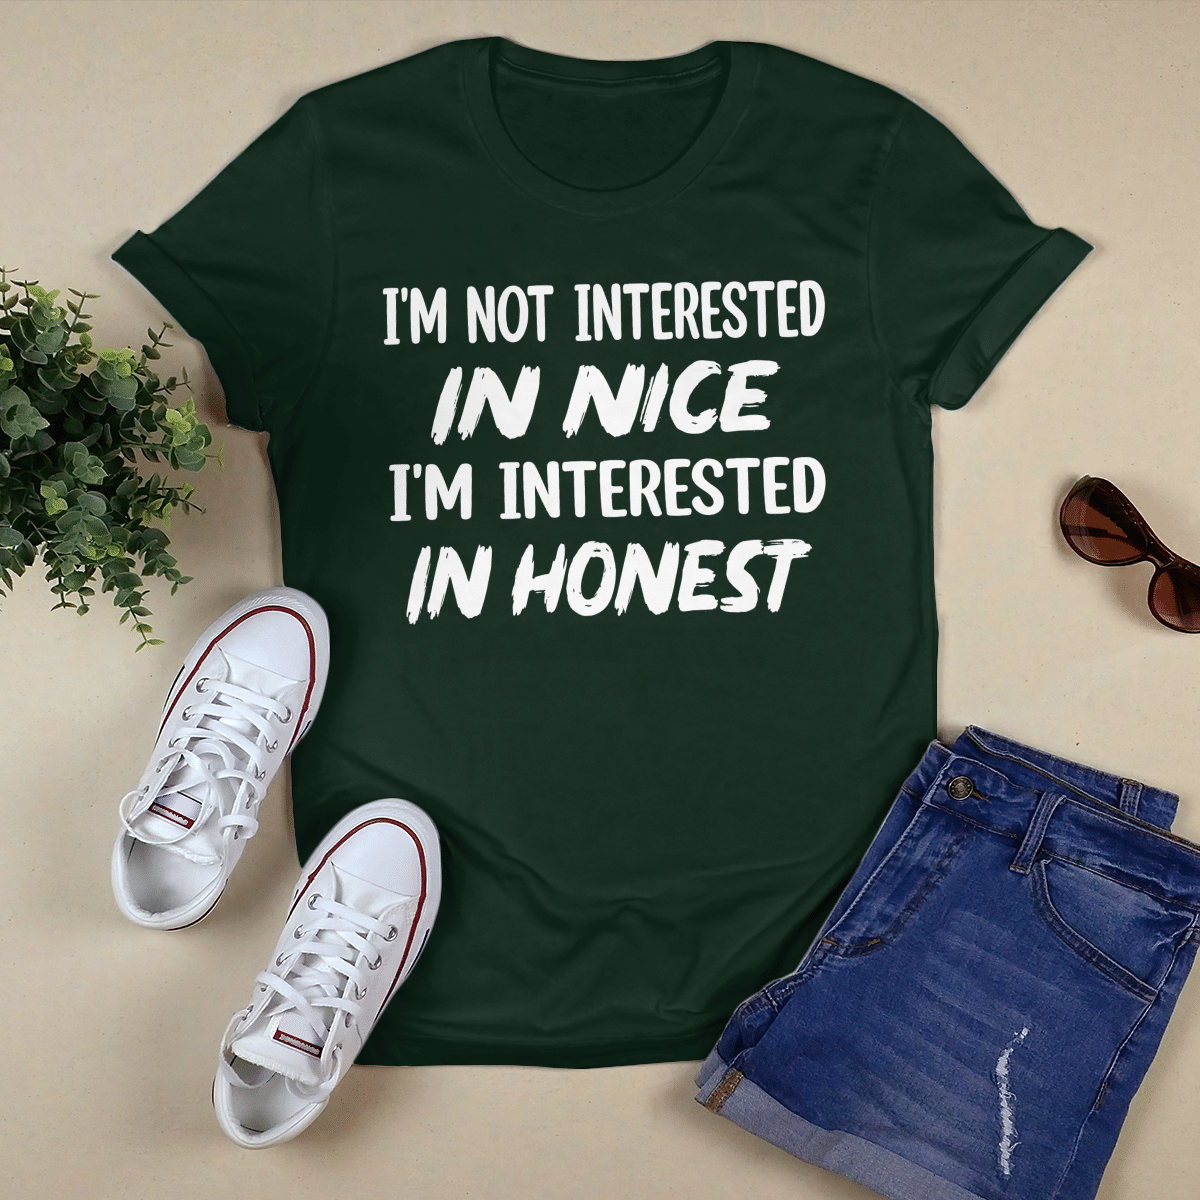 I_m Not Interested In Nice shirt